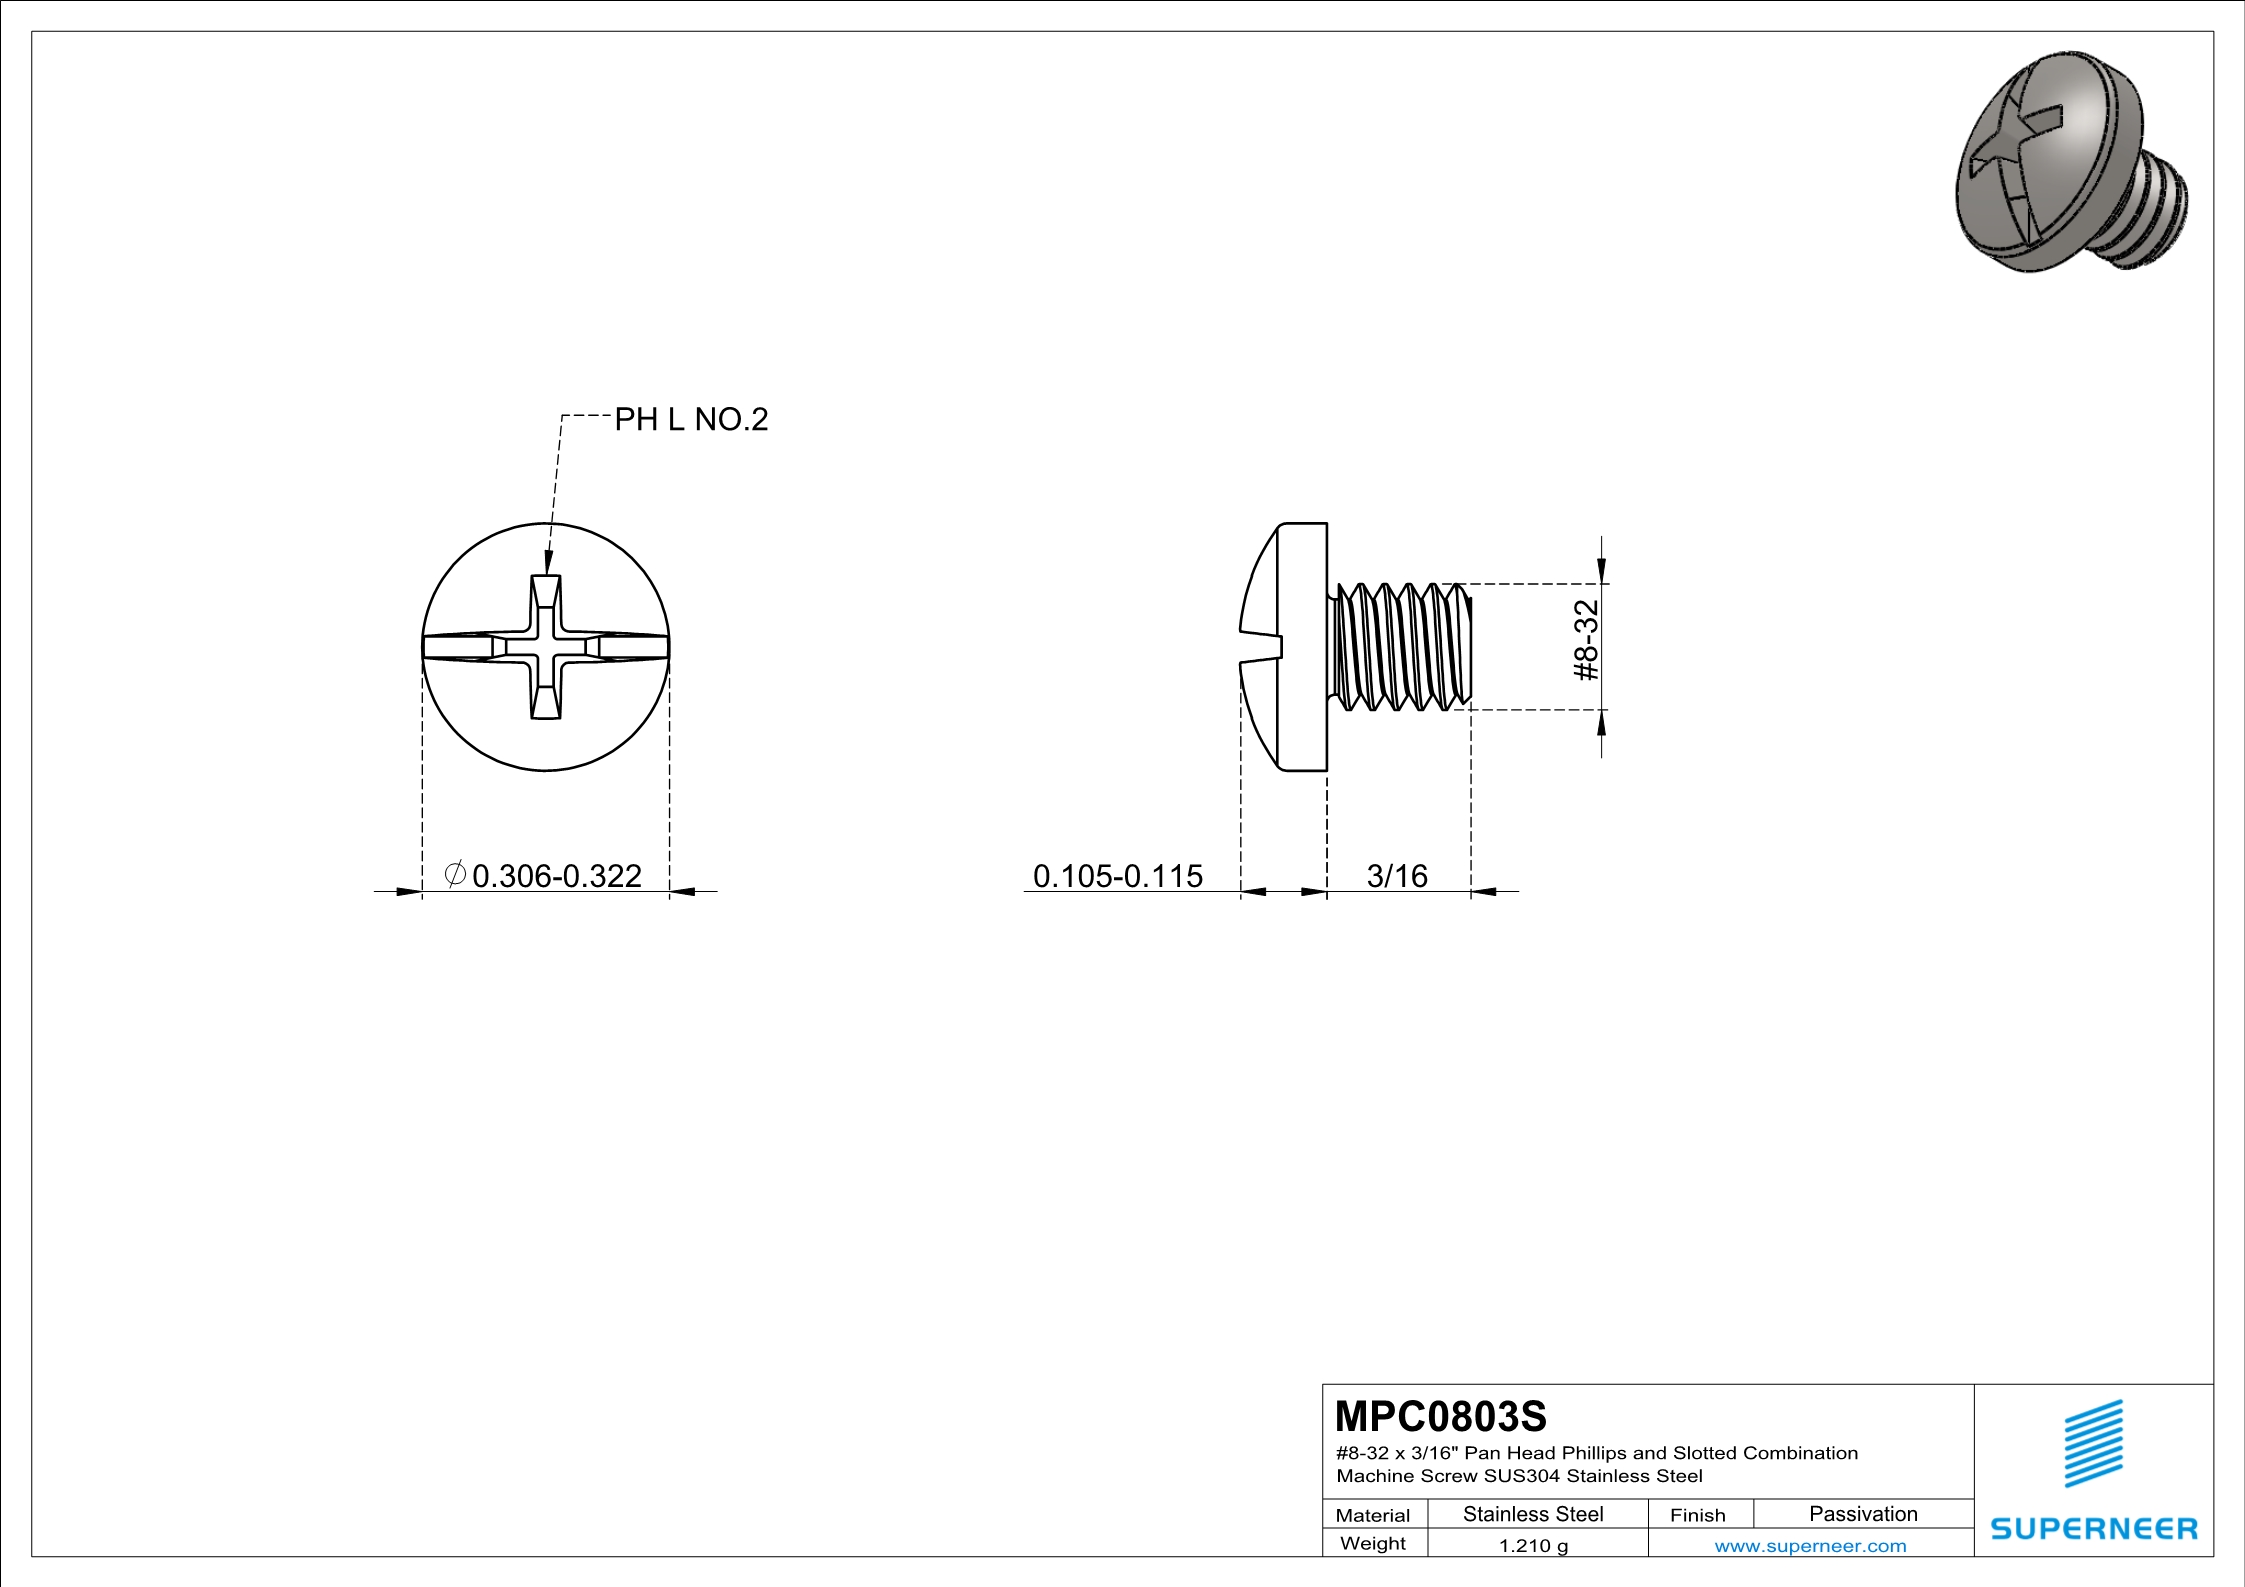 8-32 x 3/16" Pan Head Phillips and Slotted Combination Machine Screw SUS304 Stainless Steel Inox